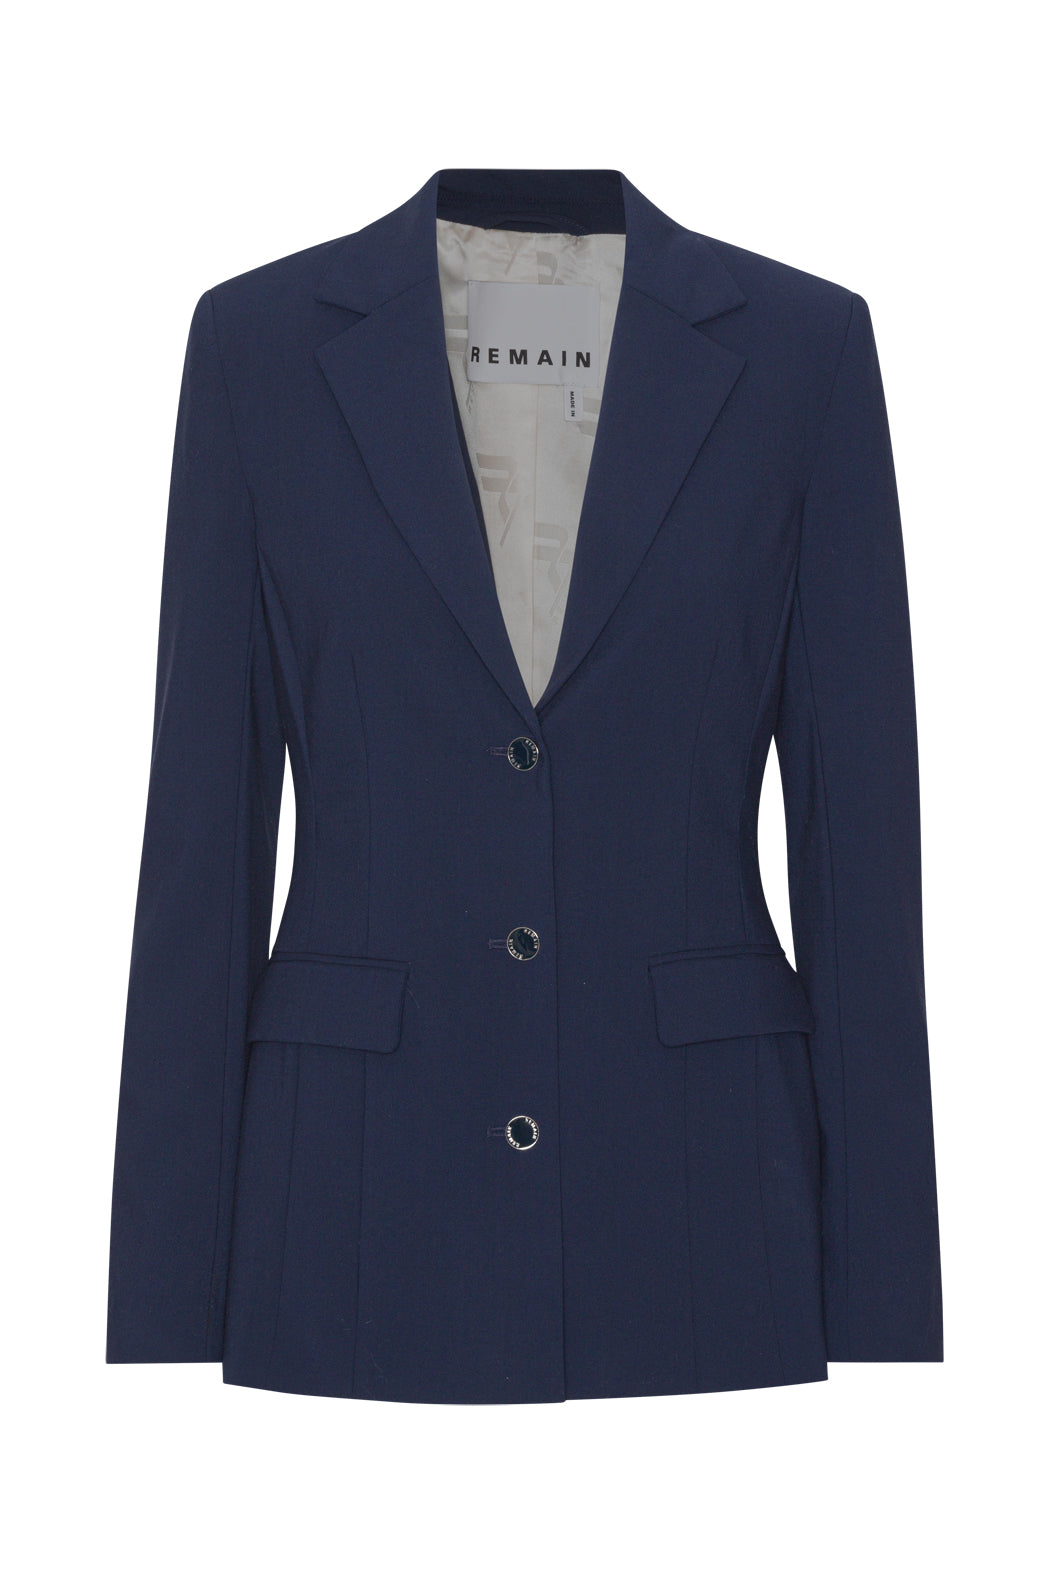 Remain Fitted Suiting Blazer